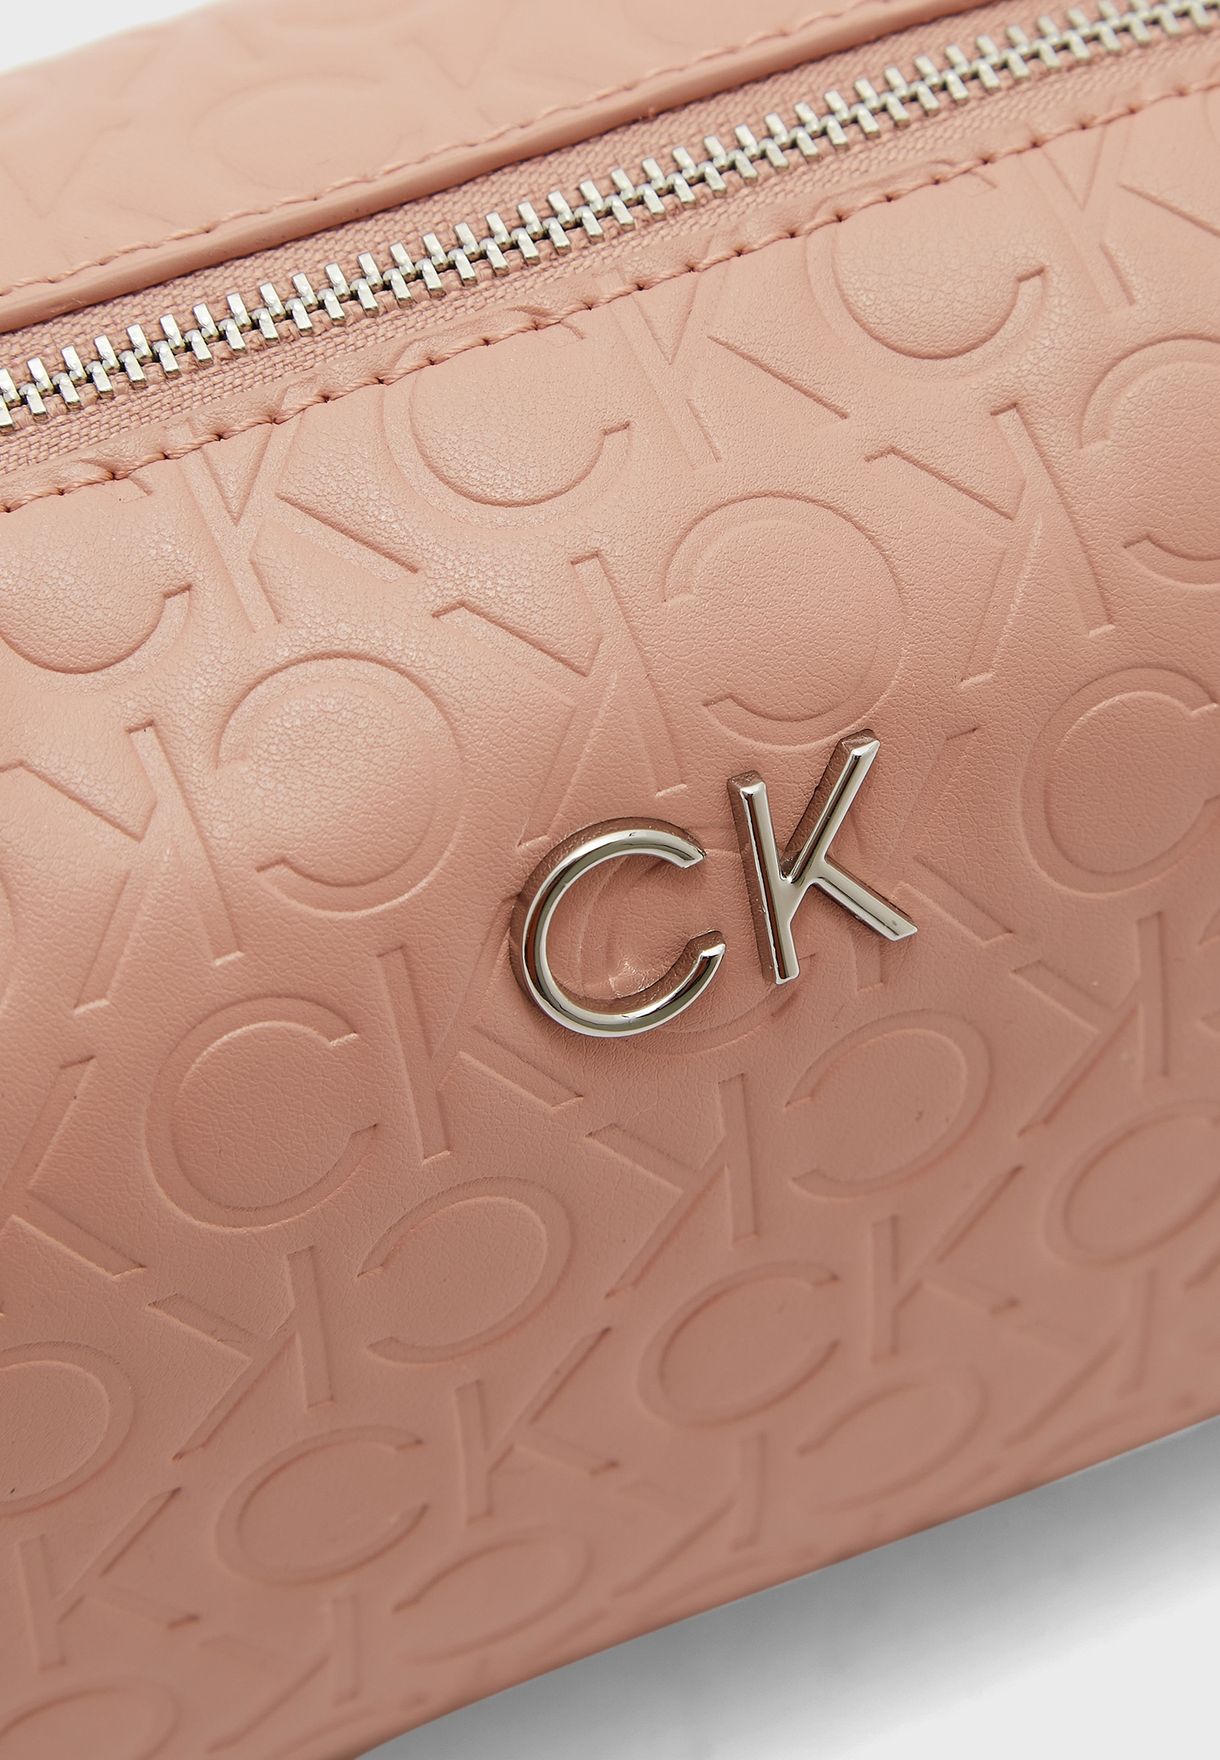 Re Lock Monogram Cosmetic Pouch